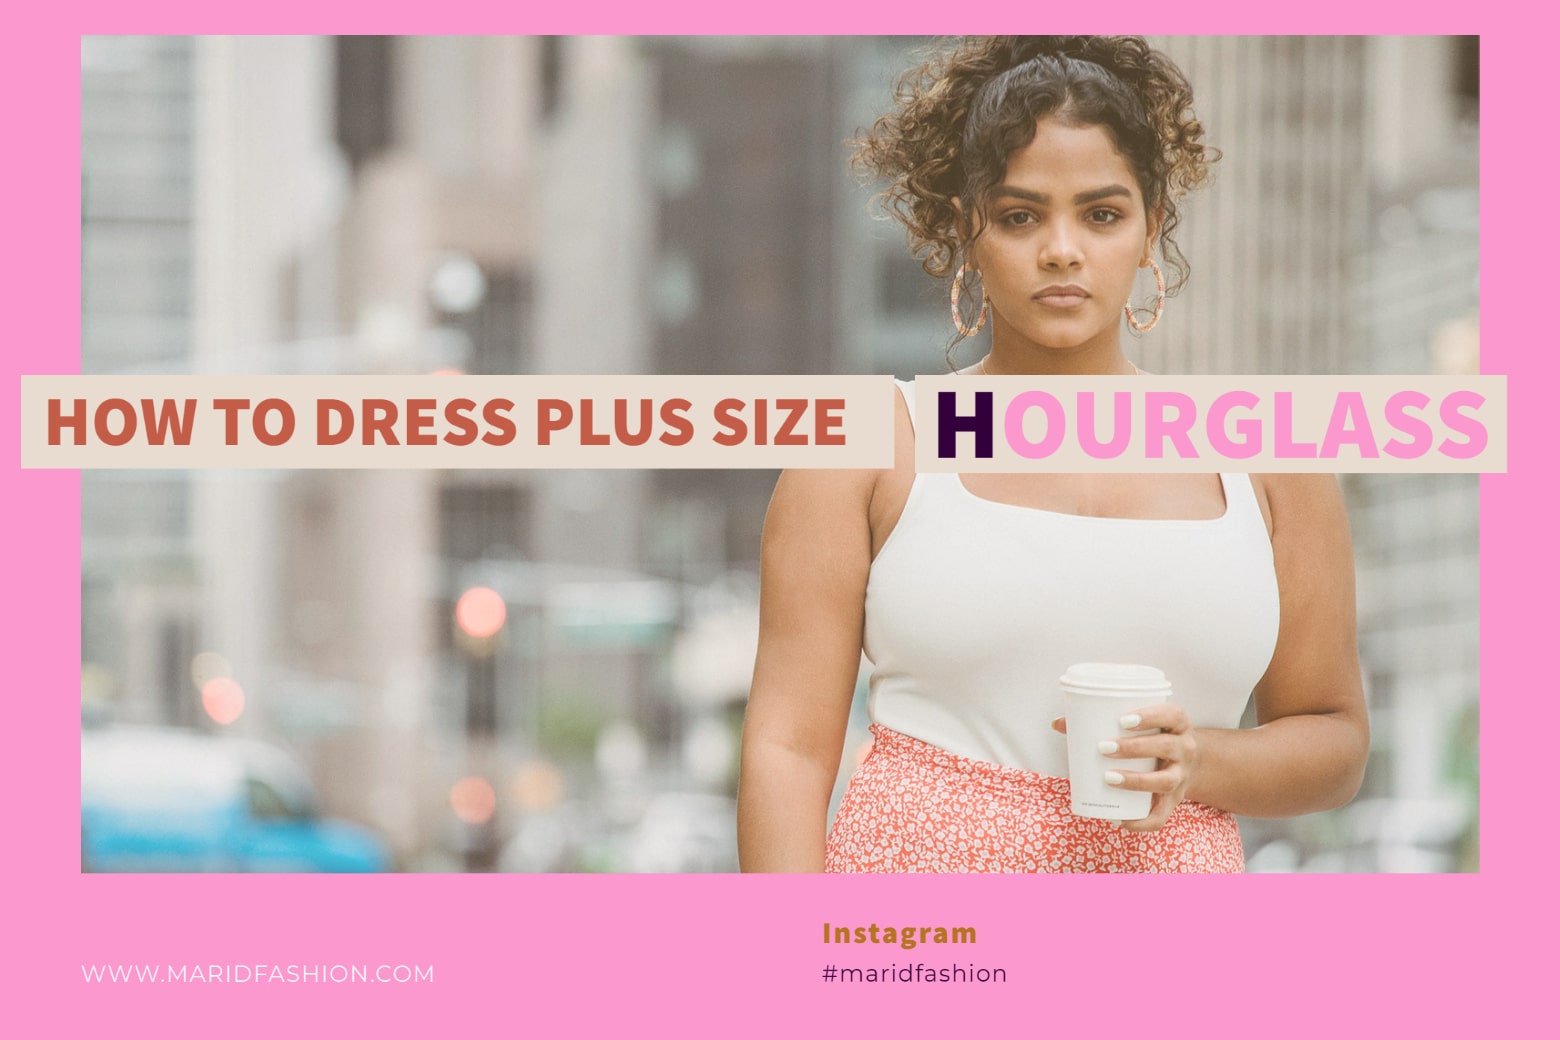 How to Dress Plus Size Hourglass: It’s Not as Difficult as You Think